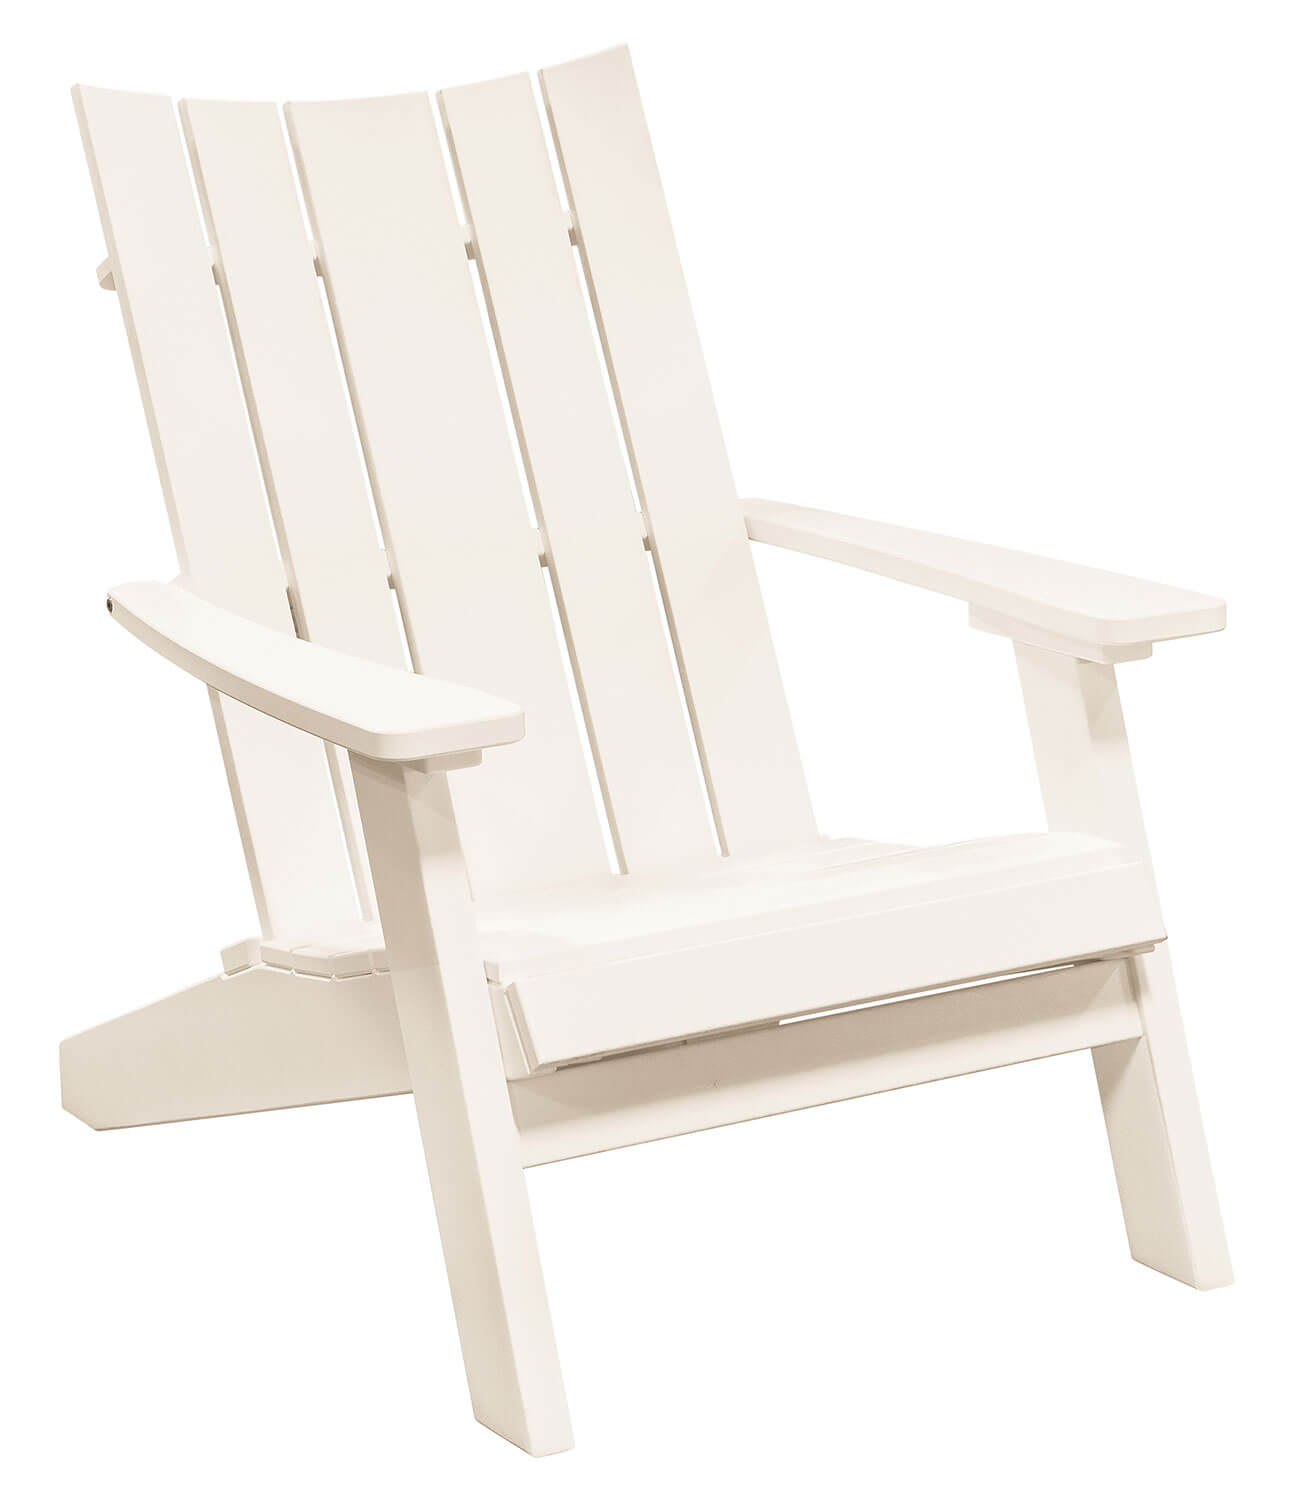 EC Woods Liberty Adirondack Outdoor Poly Chair shown in Bright White